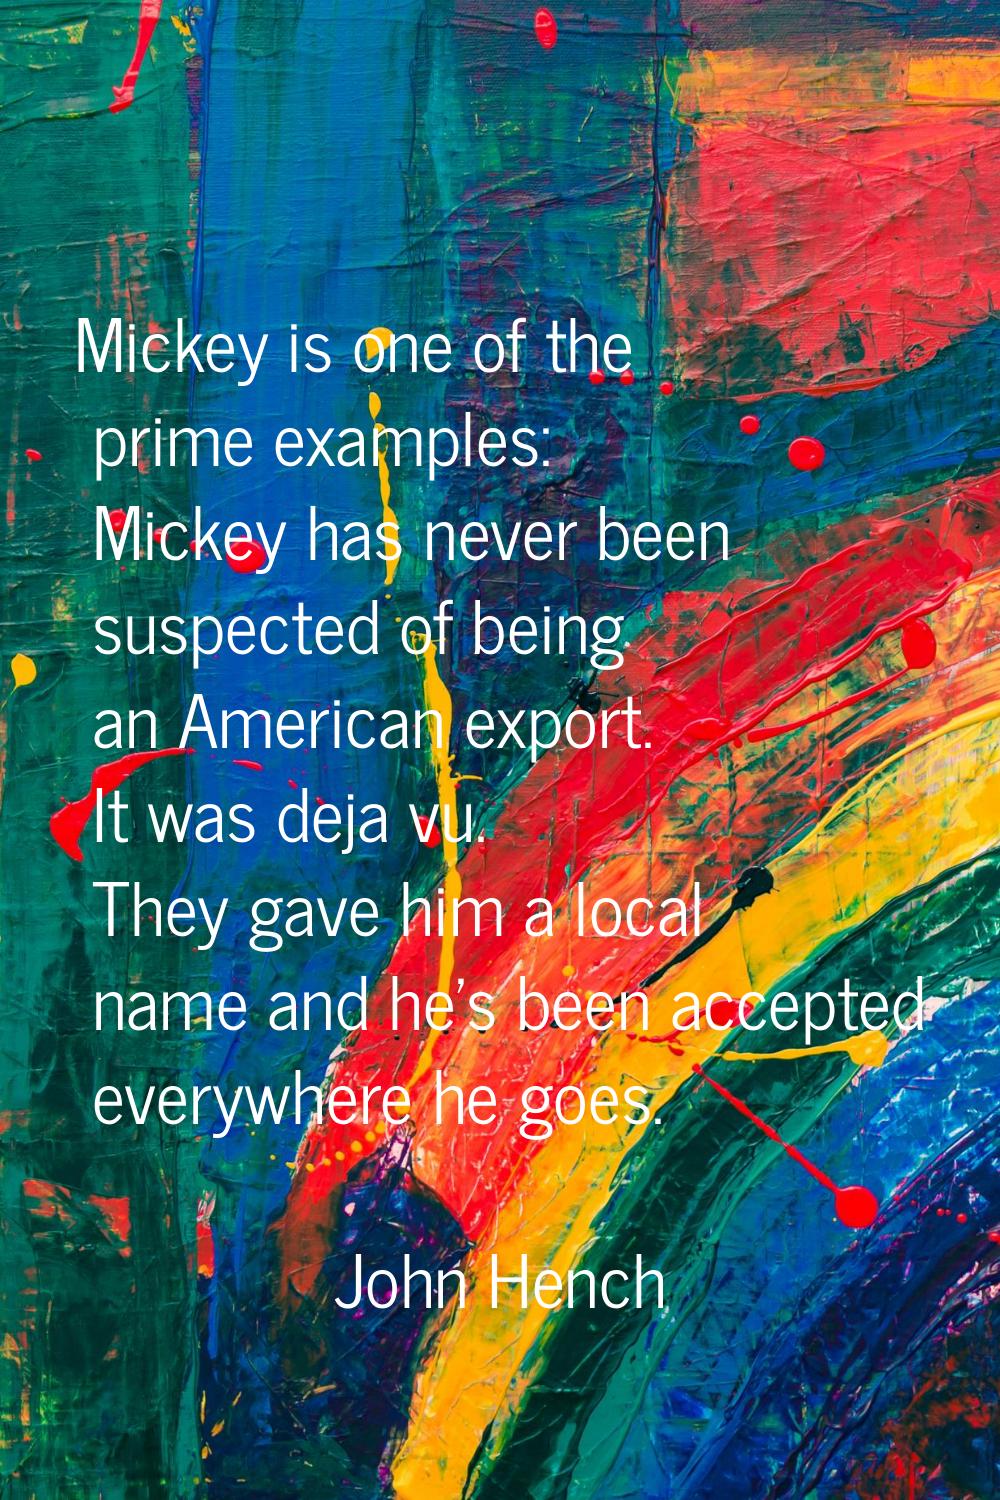 Mickey is one of the prime examples: Mickey has never been suspected of being an American export. I